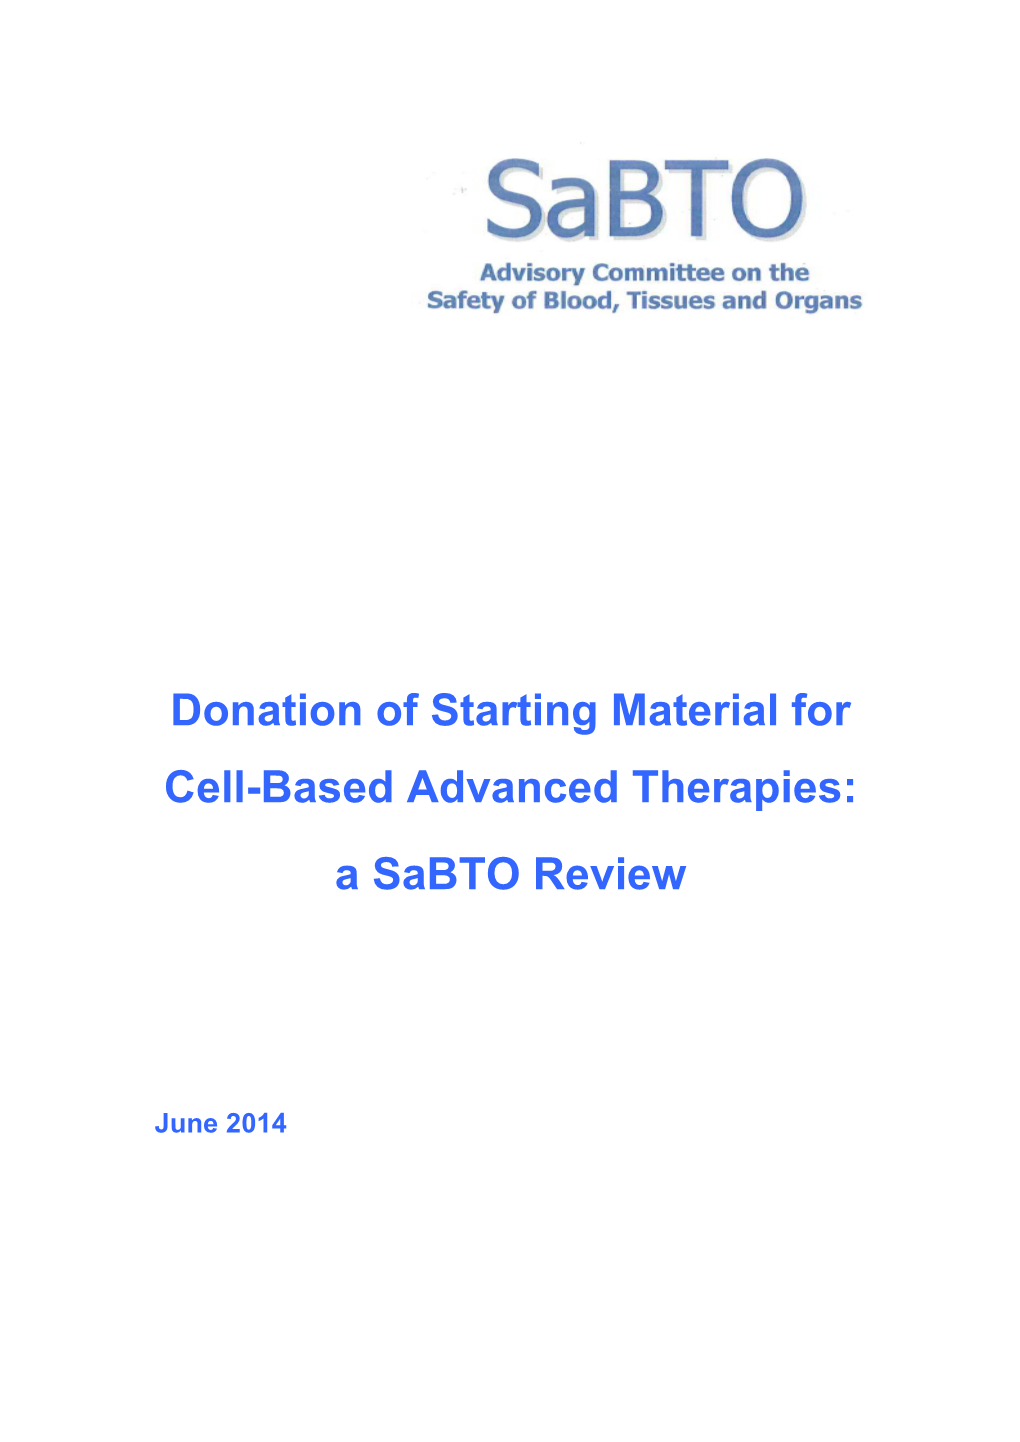 Donation of Starting Material for Cell-Based Advanced Therapies: a Sabto Review